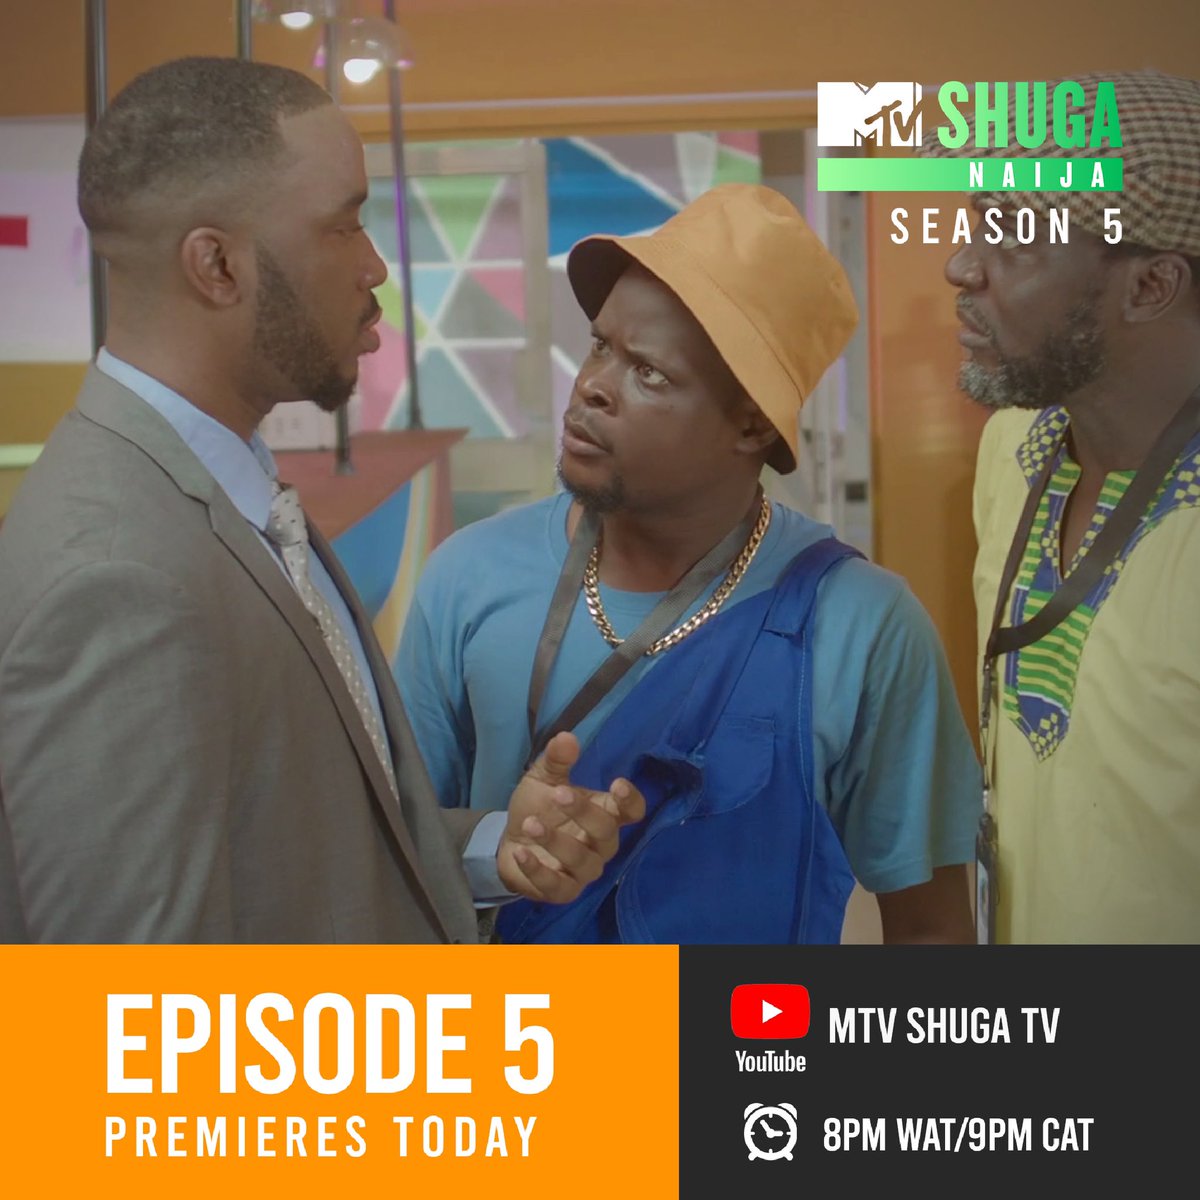 YouTube gang, we coming through with episode 5 tonight! Come see Wasiu deck the living darkness out of somebody’s son tonight 😏 #MTVShugaNaija5